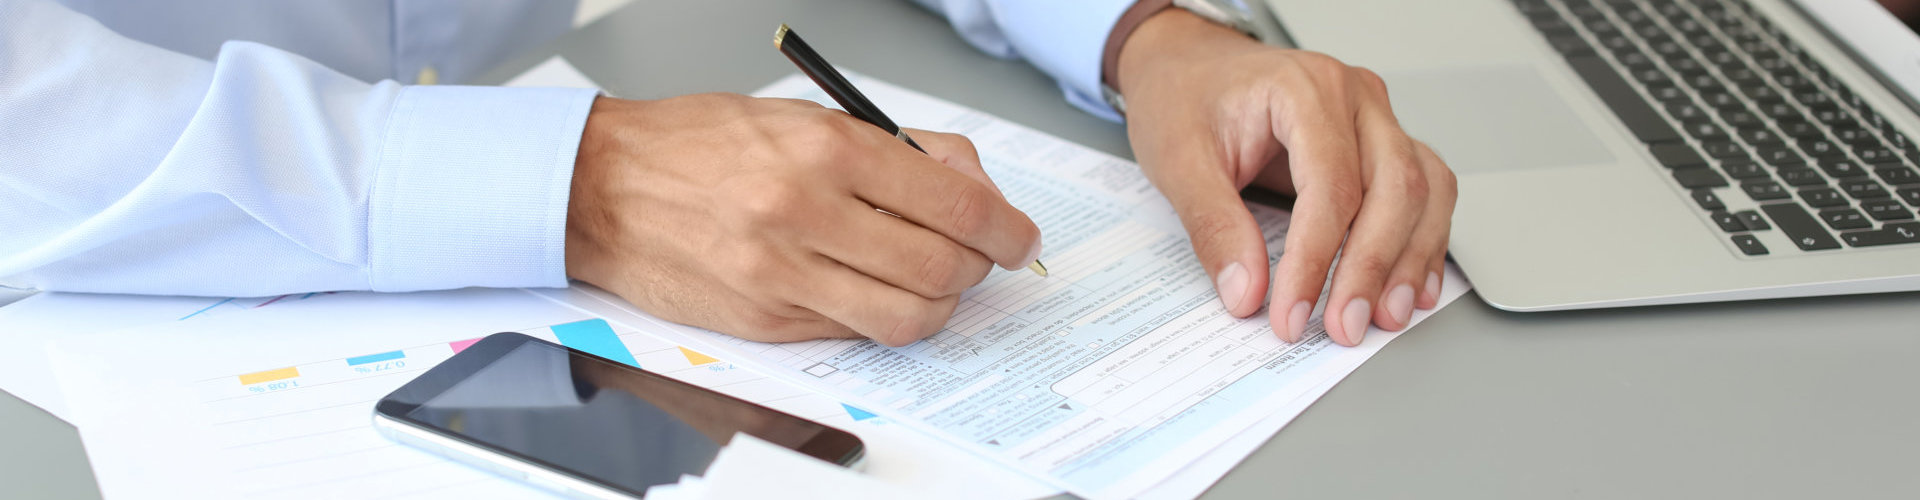 accountant working with documents at table